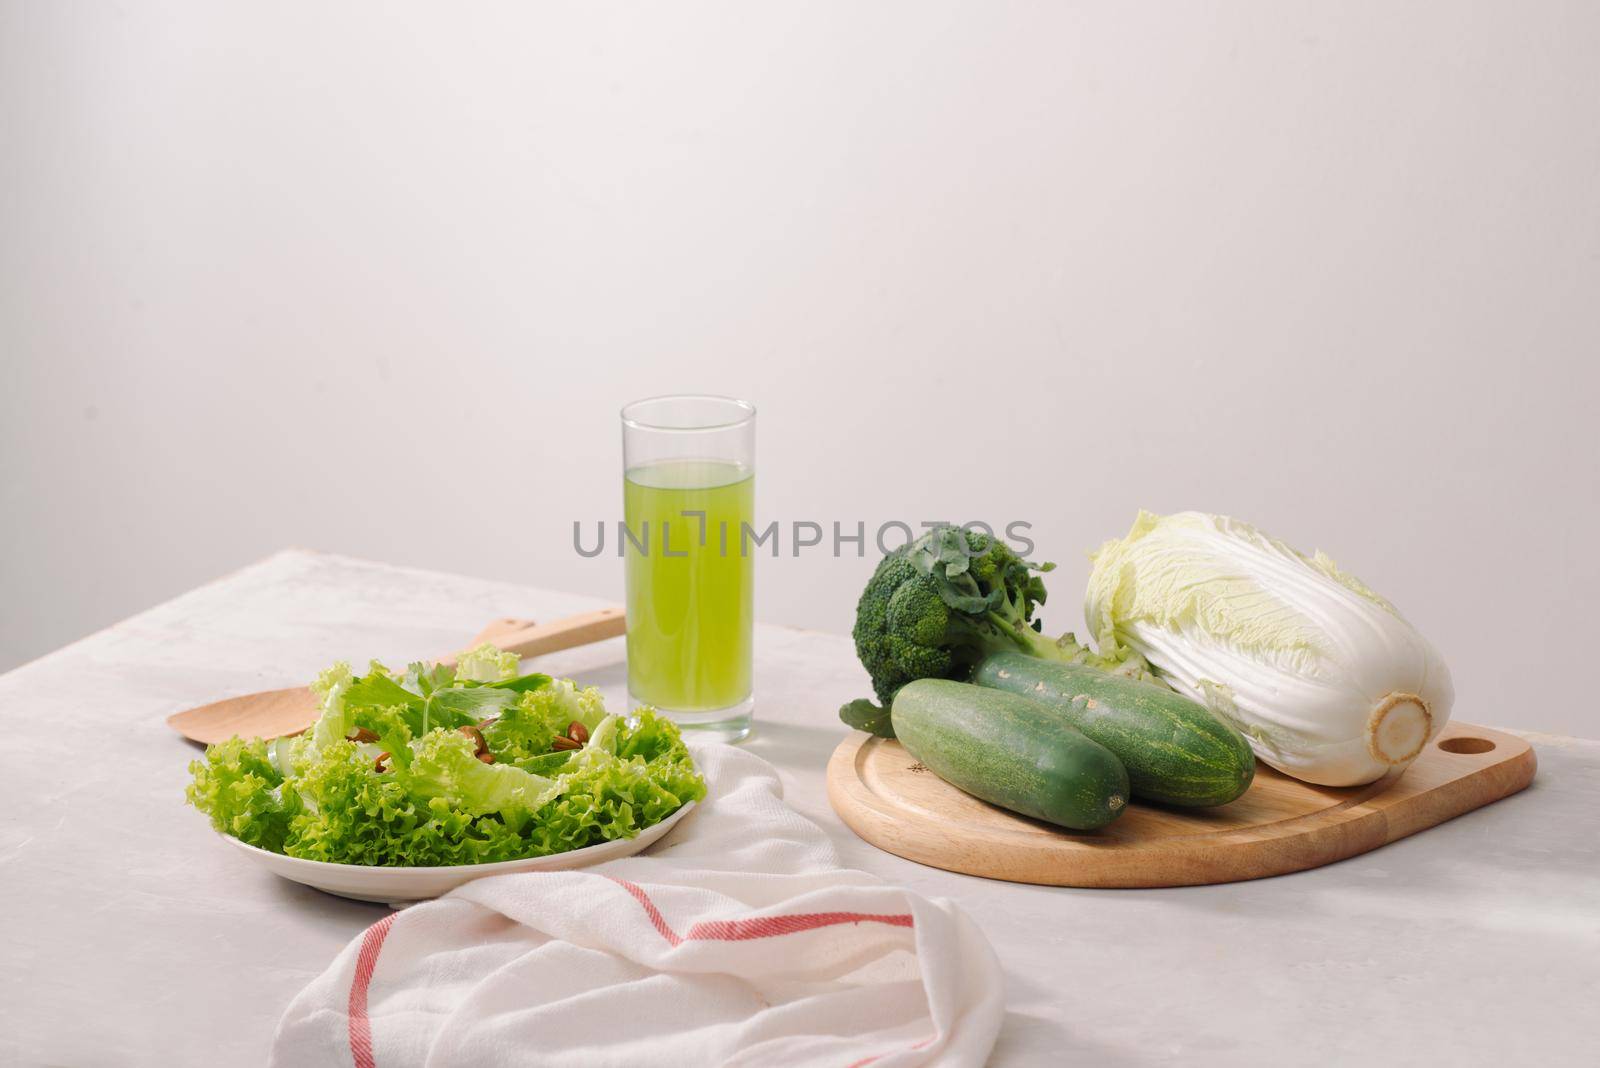 Various green organic salad ingredients on white background. Healthy lifestyle or detox diet food concept